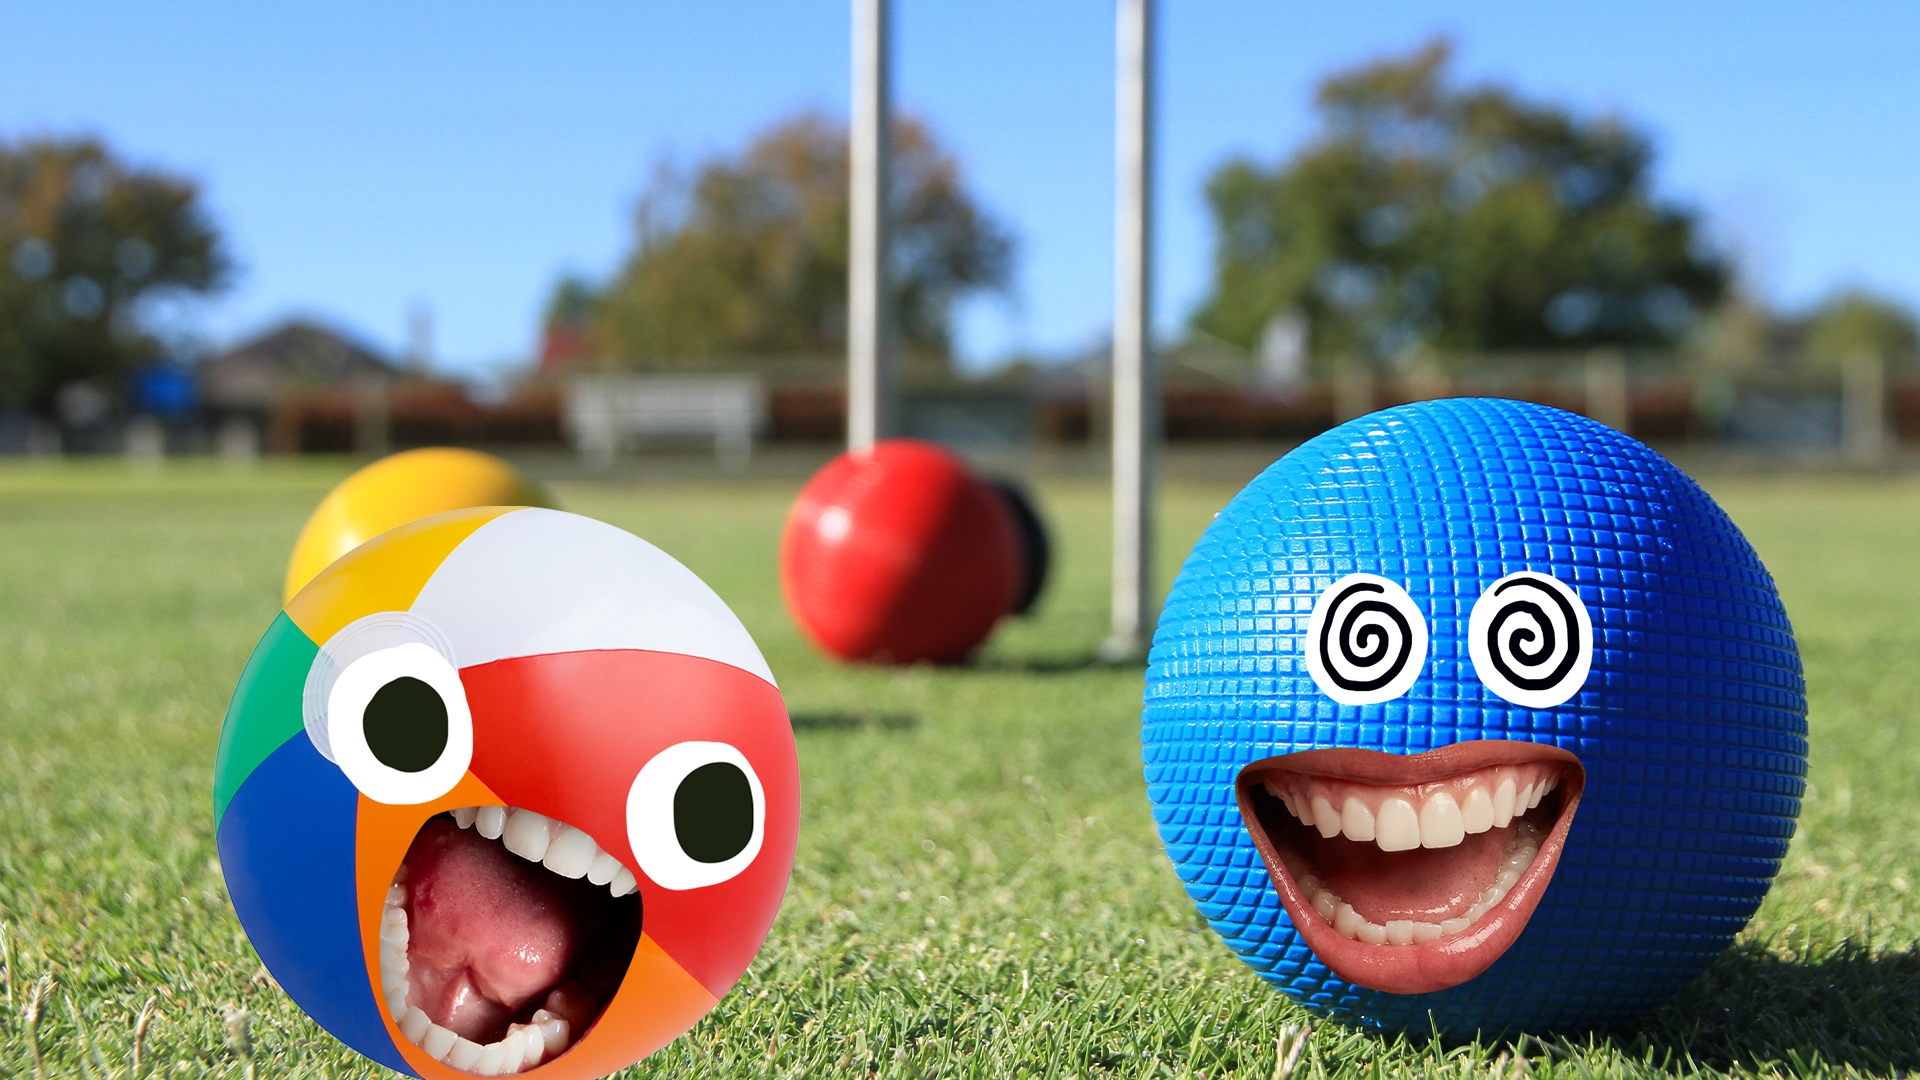 Croquet equipment on lawn, ball with face and beach ball with face